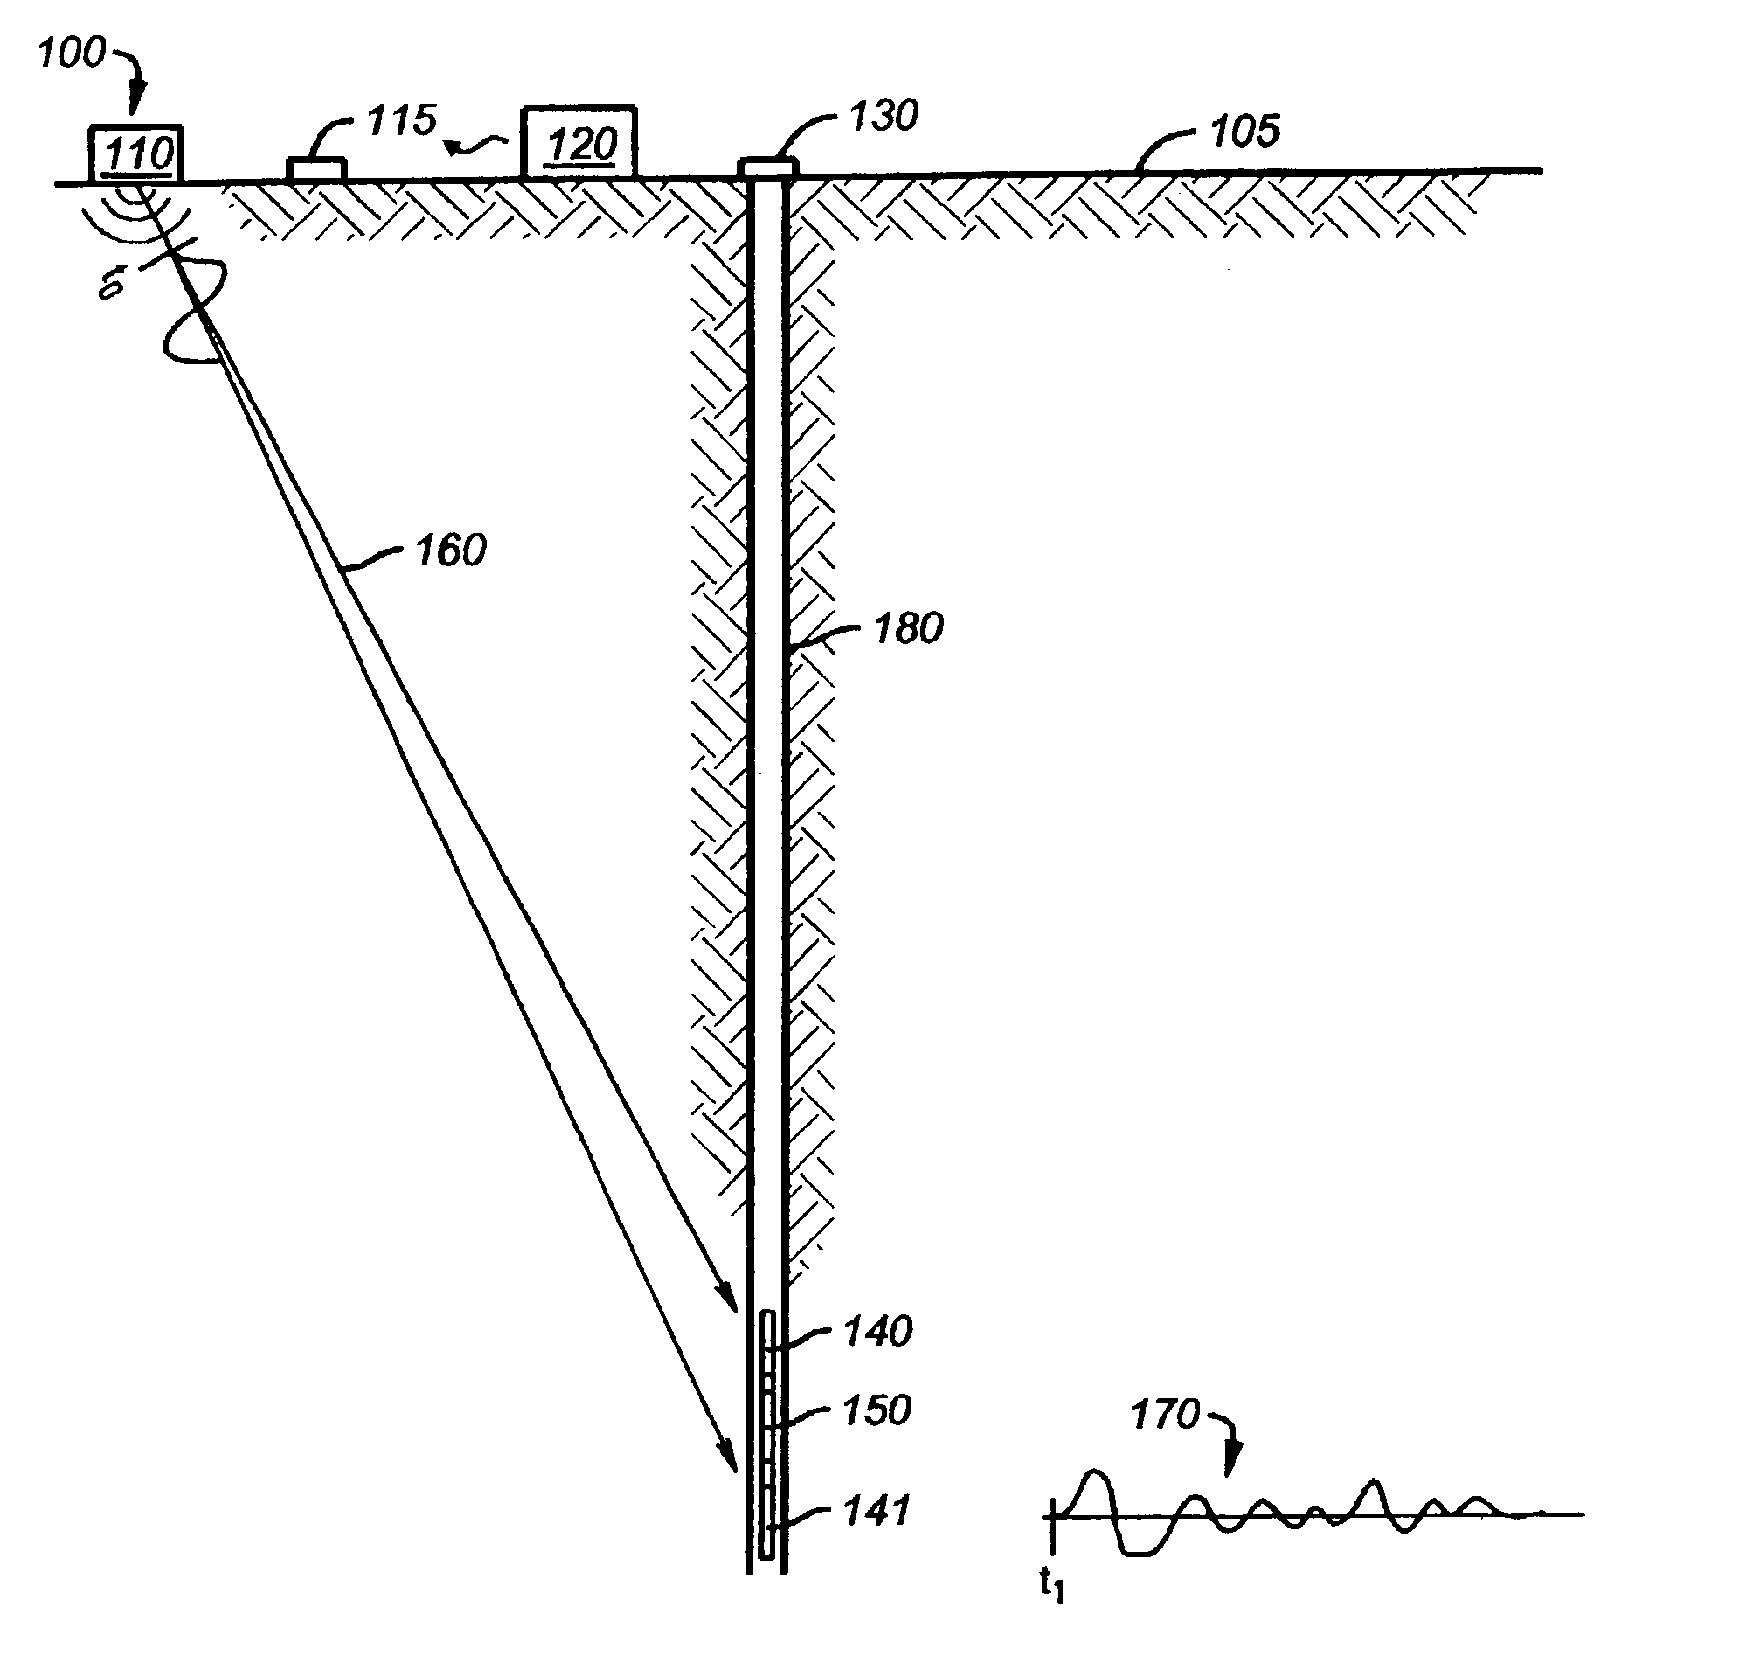 Seismic monitoring and control method